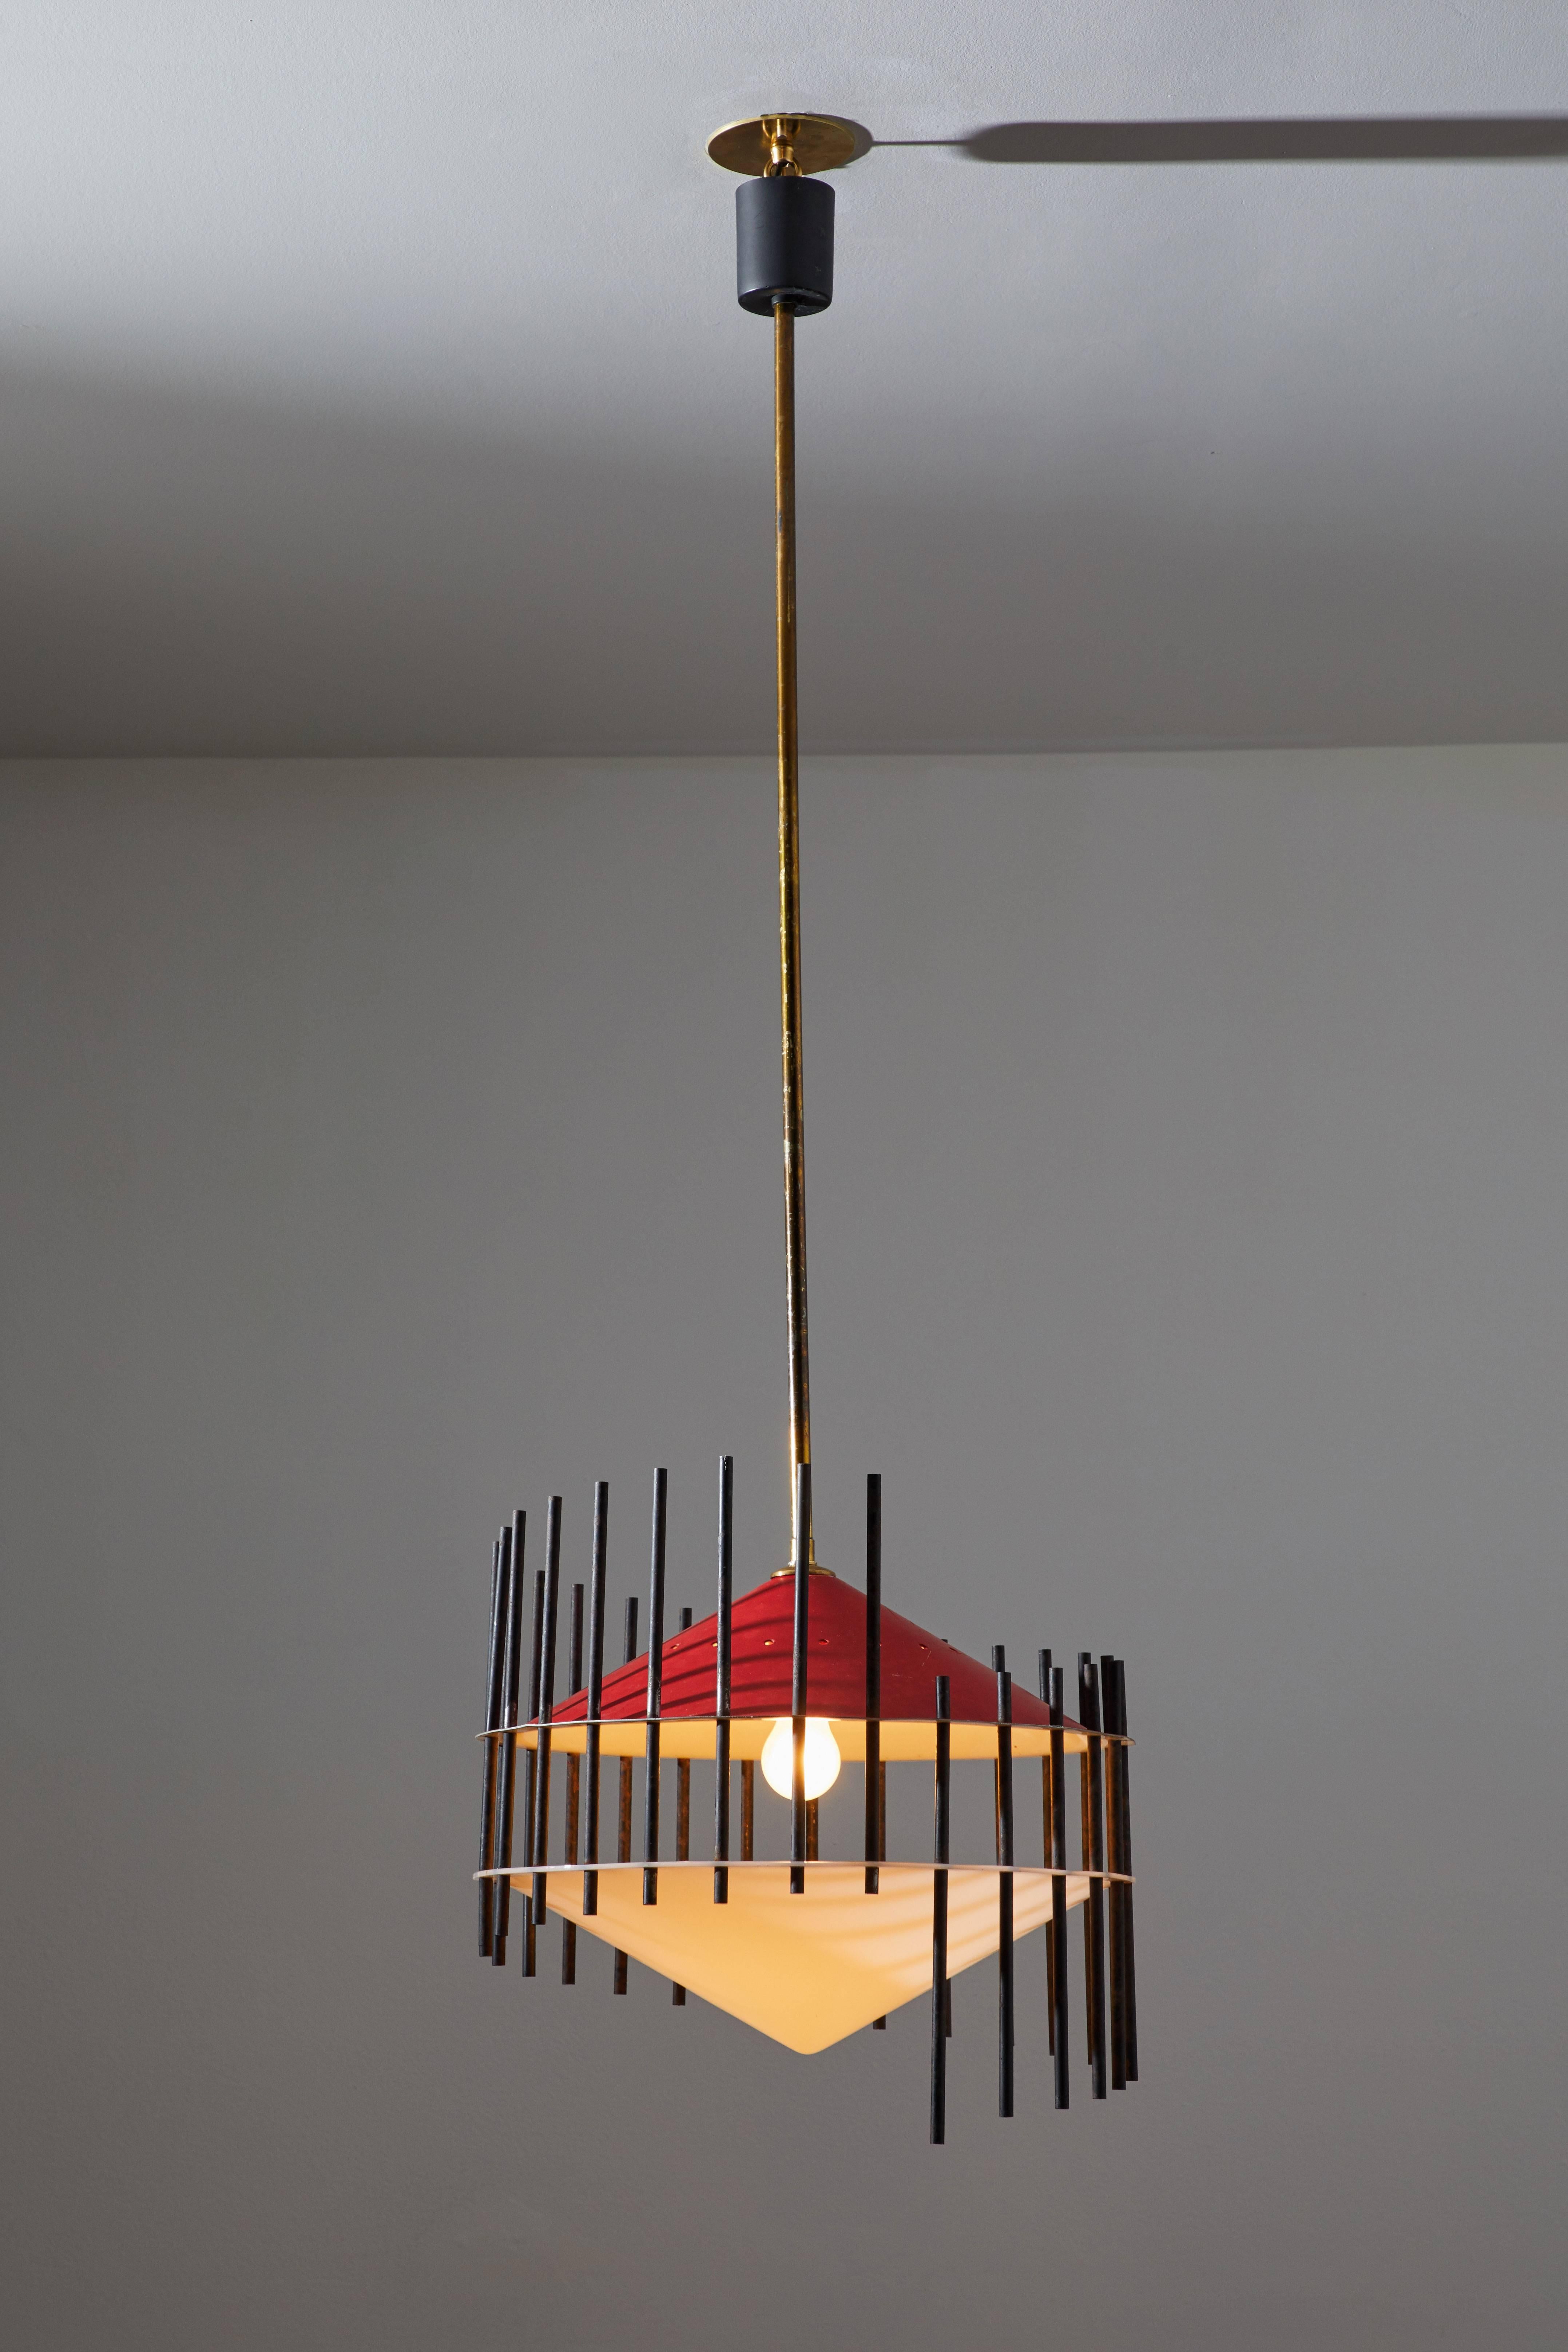 Pendant by Angelo Brotto for Esperia. Designed and manufactured in Italy 1950s. Brass, painted aluminum, colored iron and acrylic diffuser. Original canopy and custom ceiling plate. Rewired for US junction boxes. Takes one E27 100w maximum bulb.